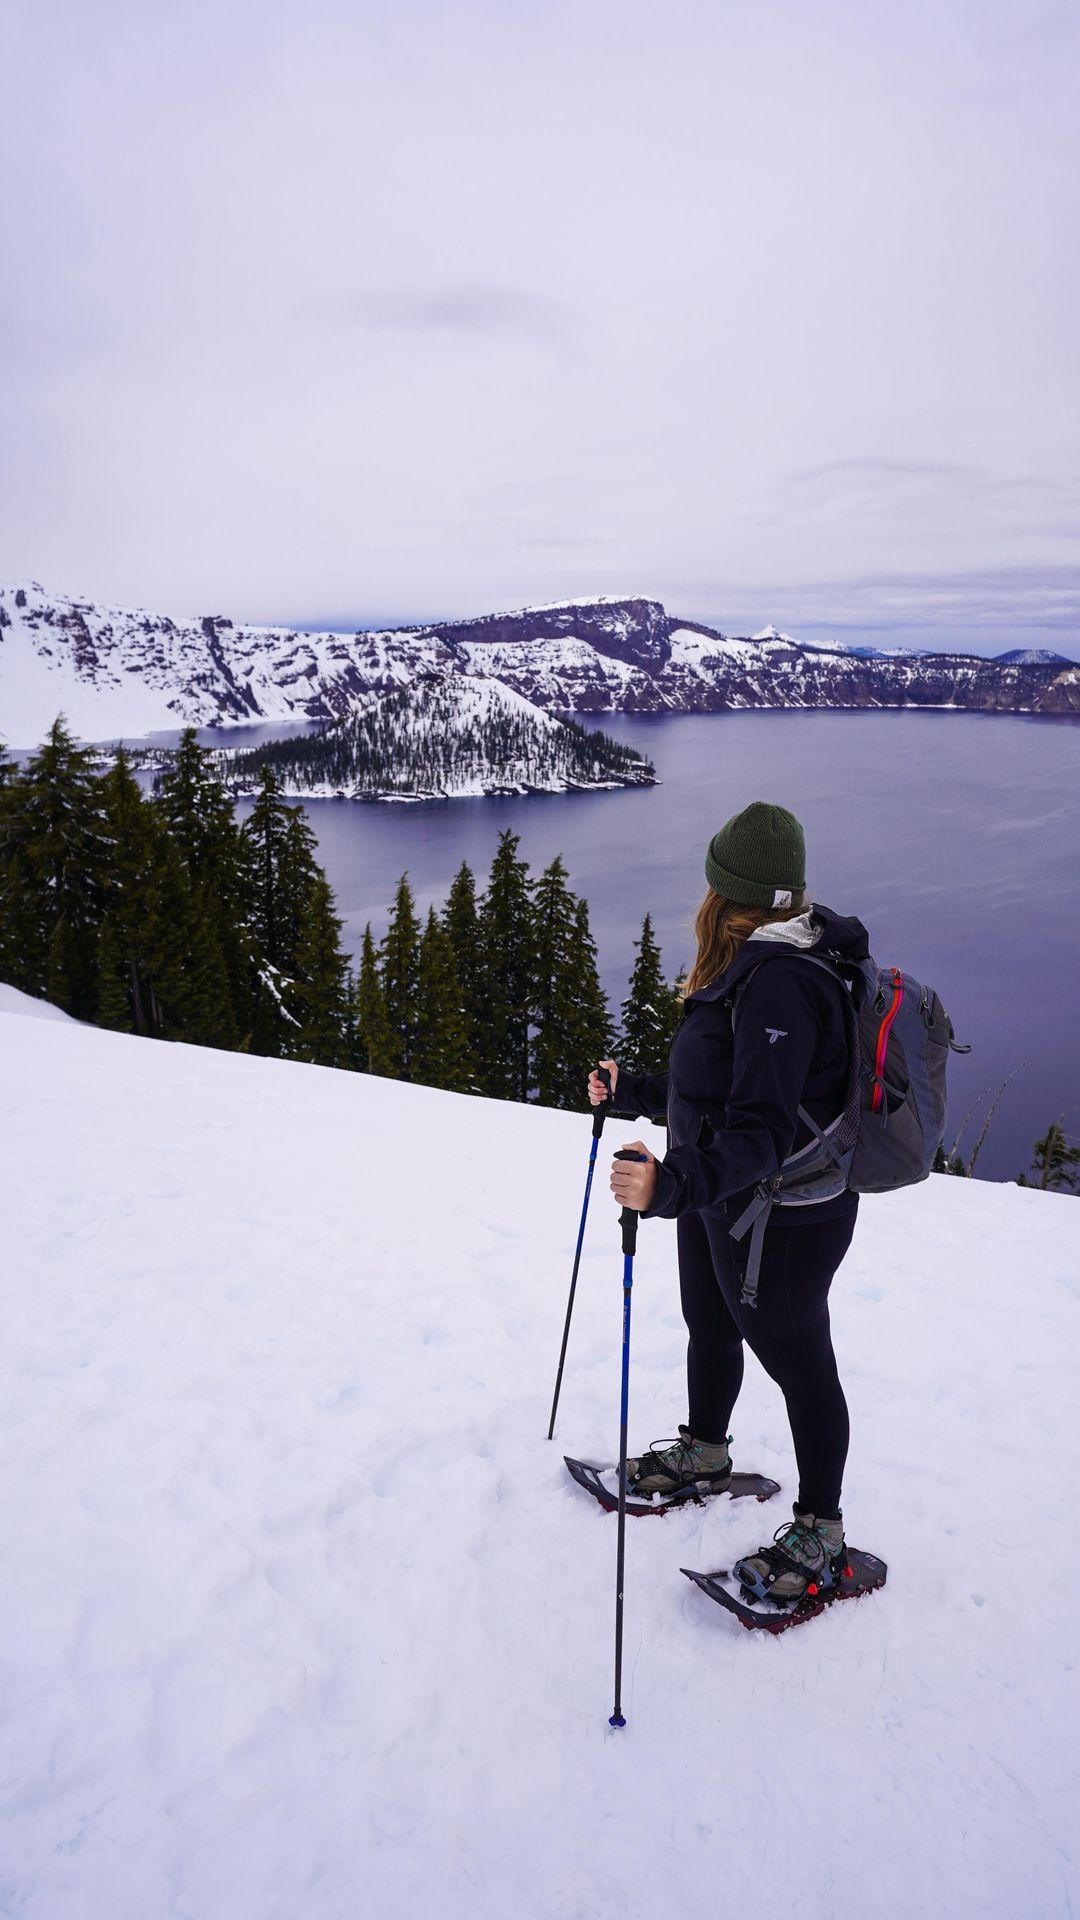 Did you know that this is what Crater Lake National Park looks like in the spring? ❄️